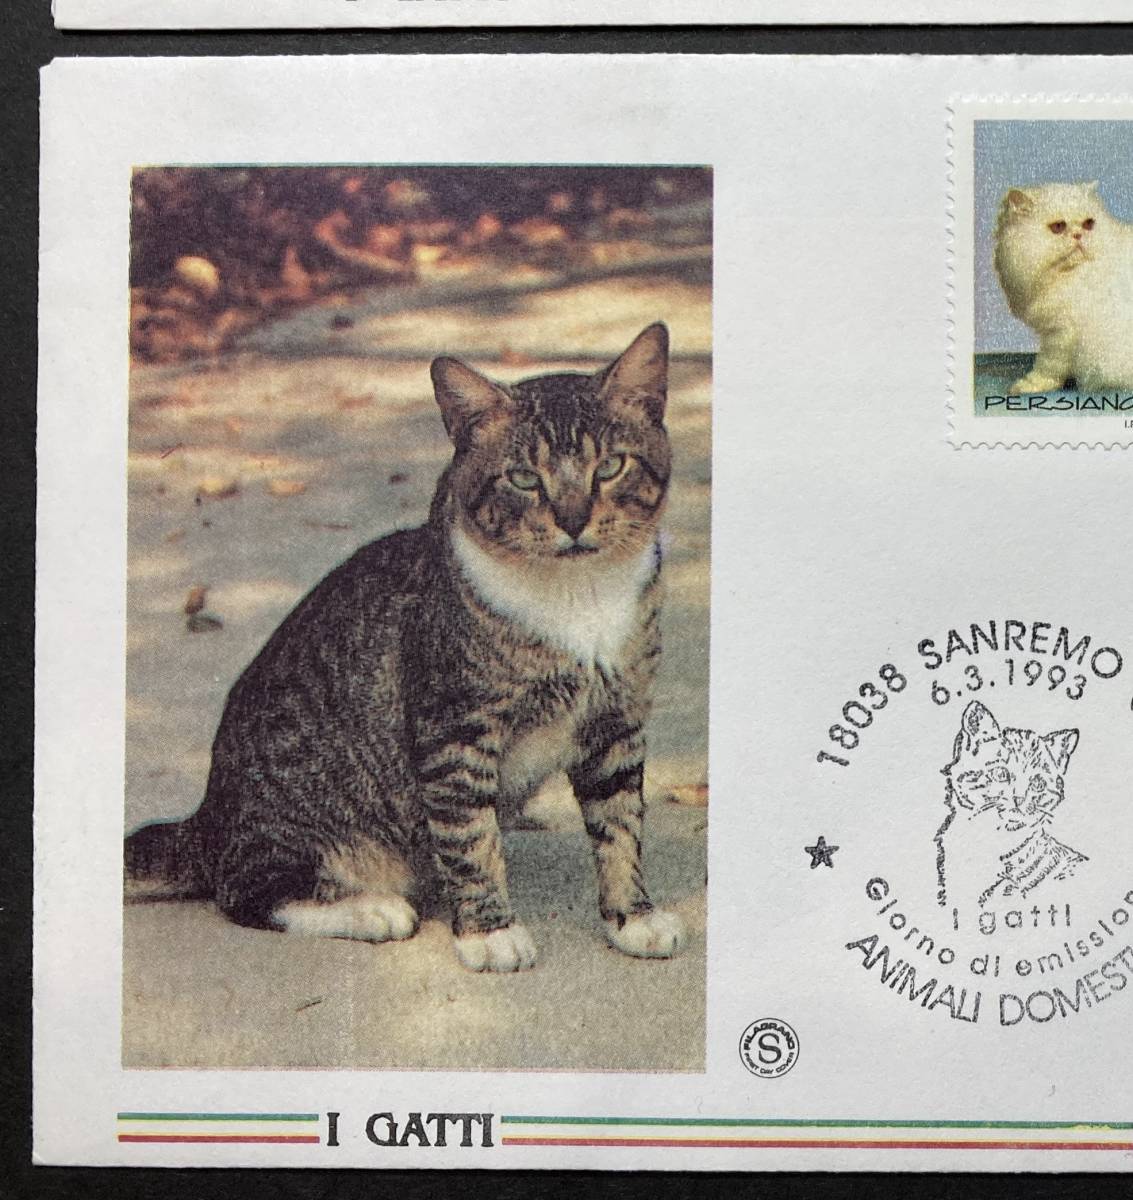  Italy 1993 year issue cat stamp FDC First Day Cover 